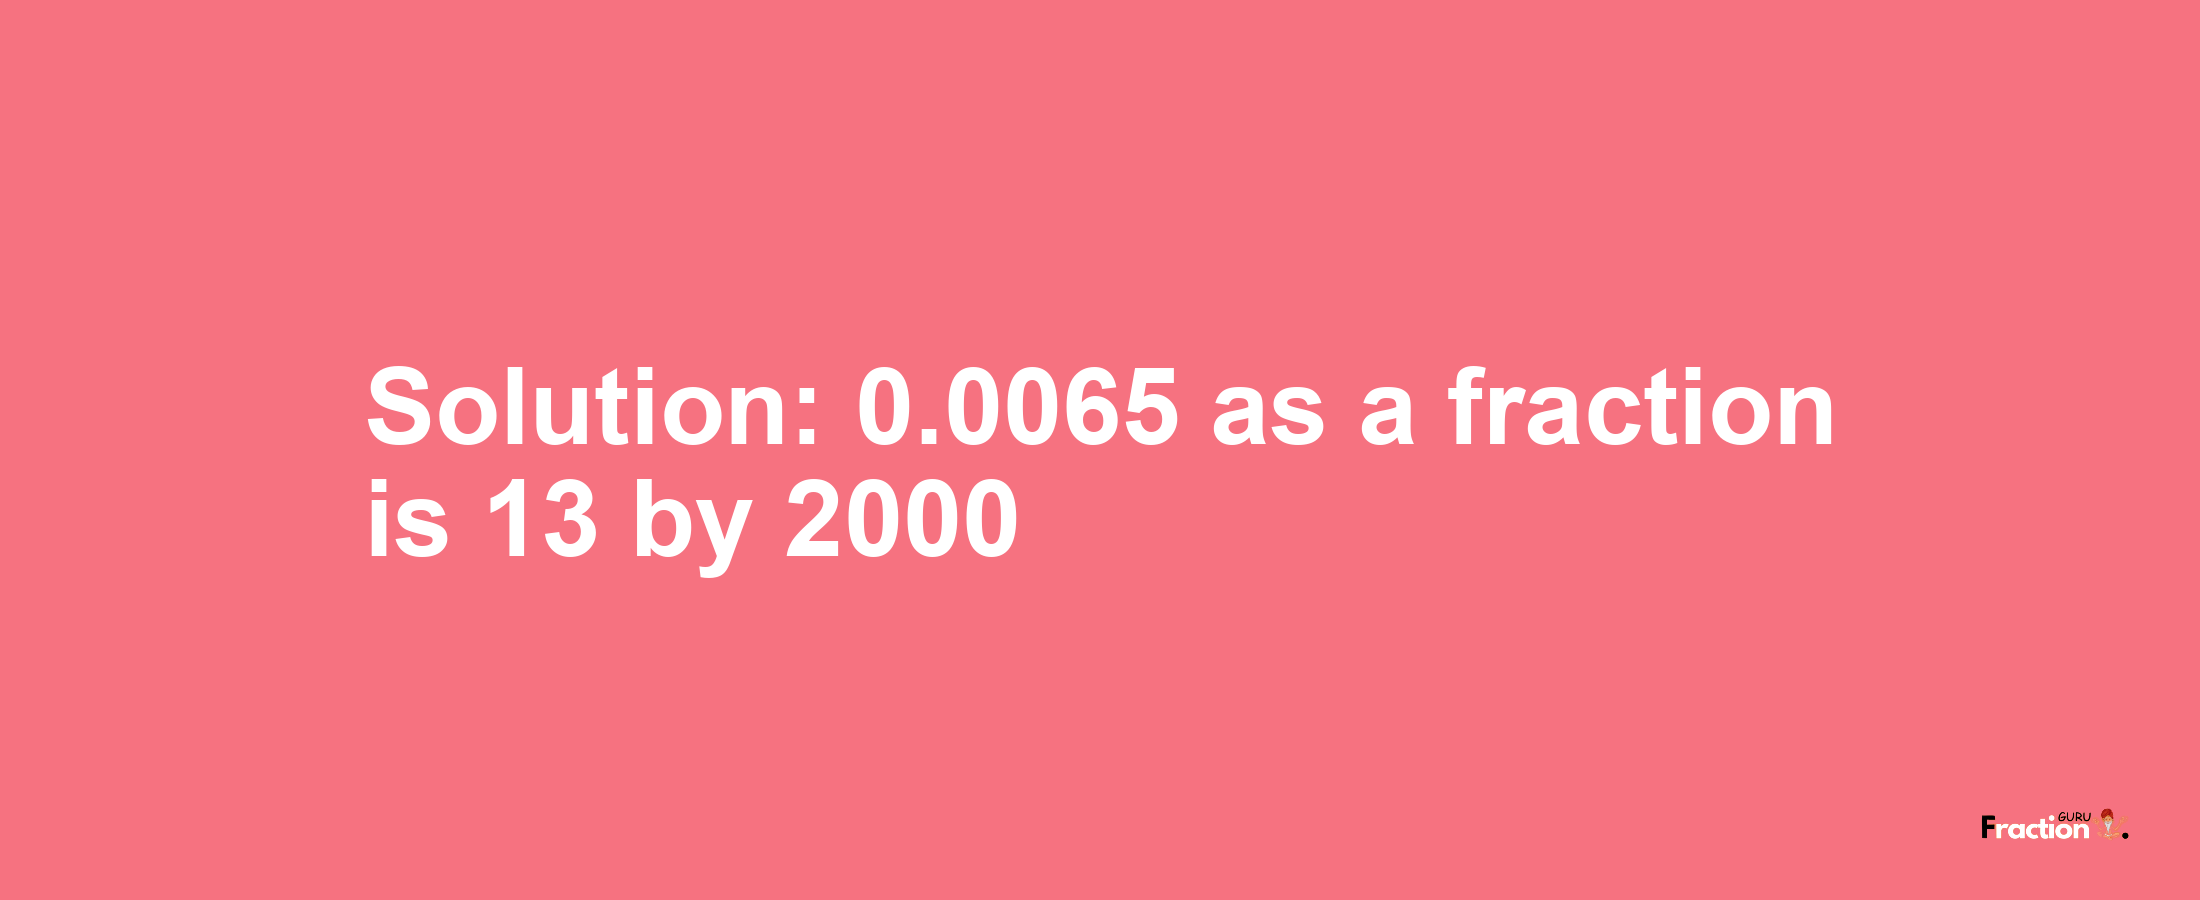 Solution:0.0065 as a fraction is 13/2000